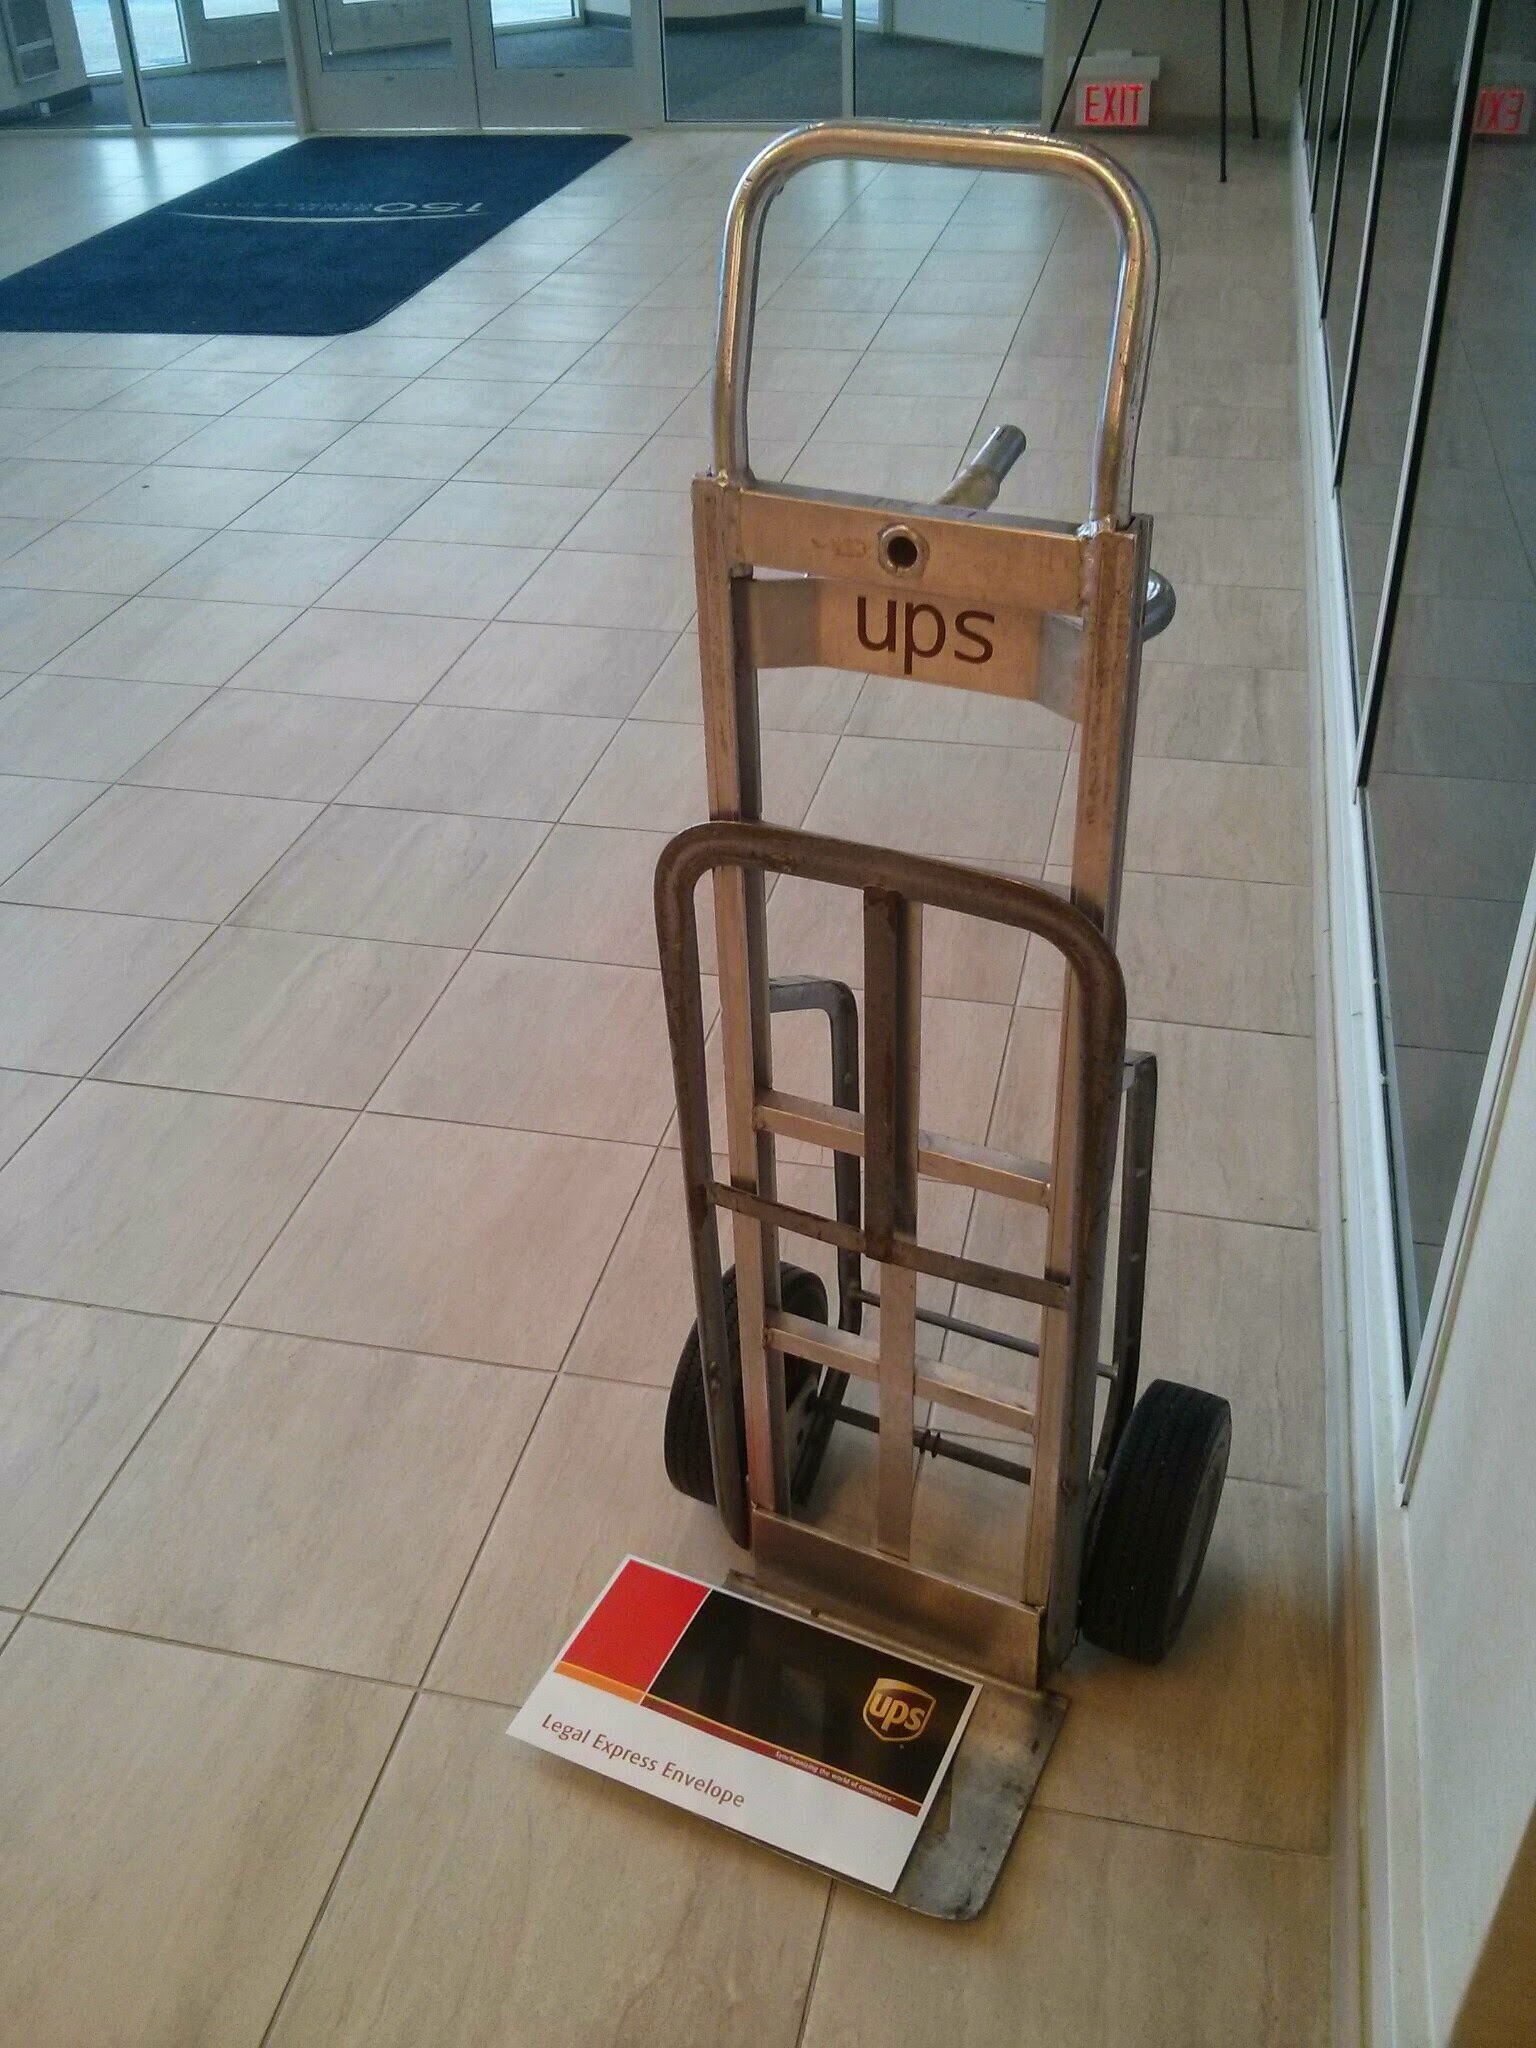 Letter on a hand truck